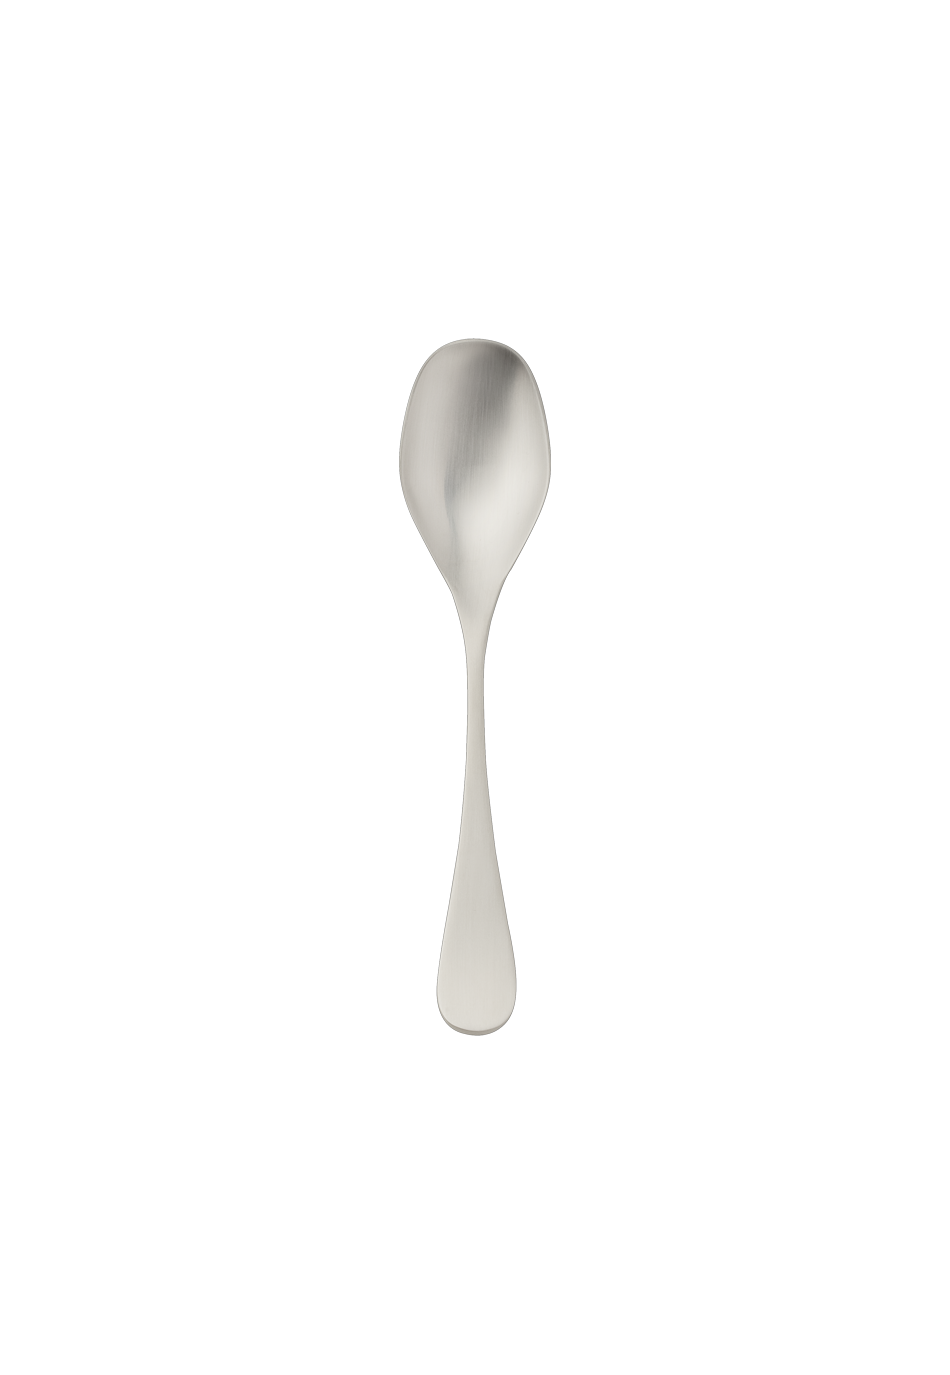 Scandia Coffee Spoon 14,5 Cm (18/8 stainless steel)